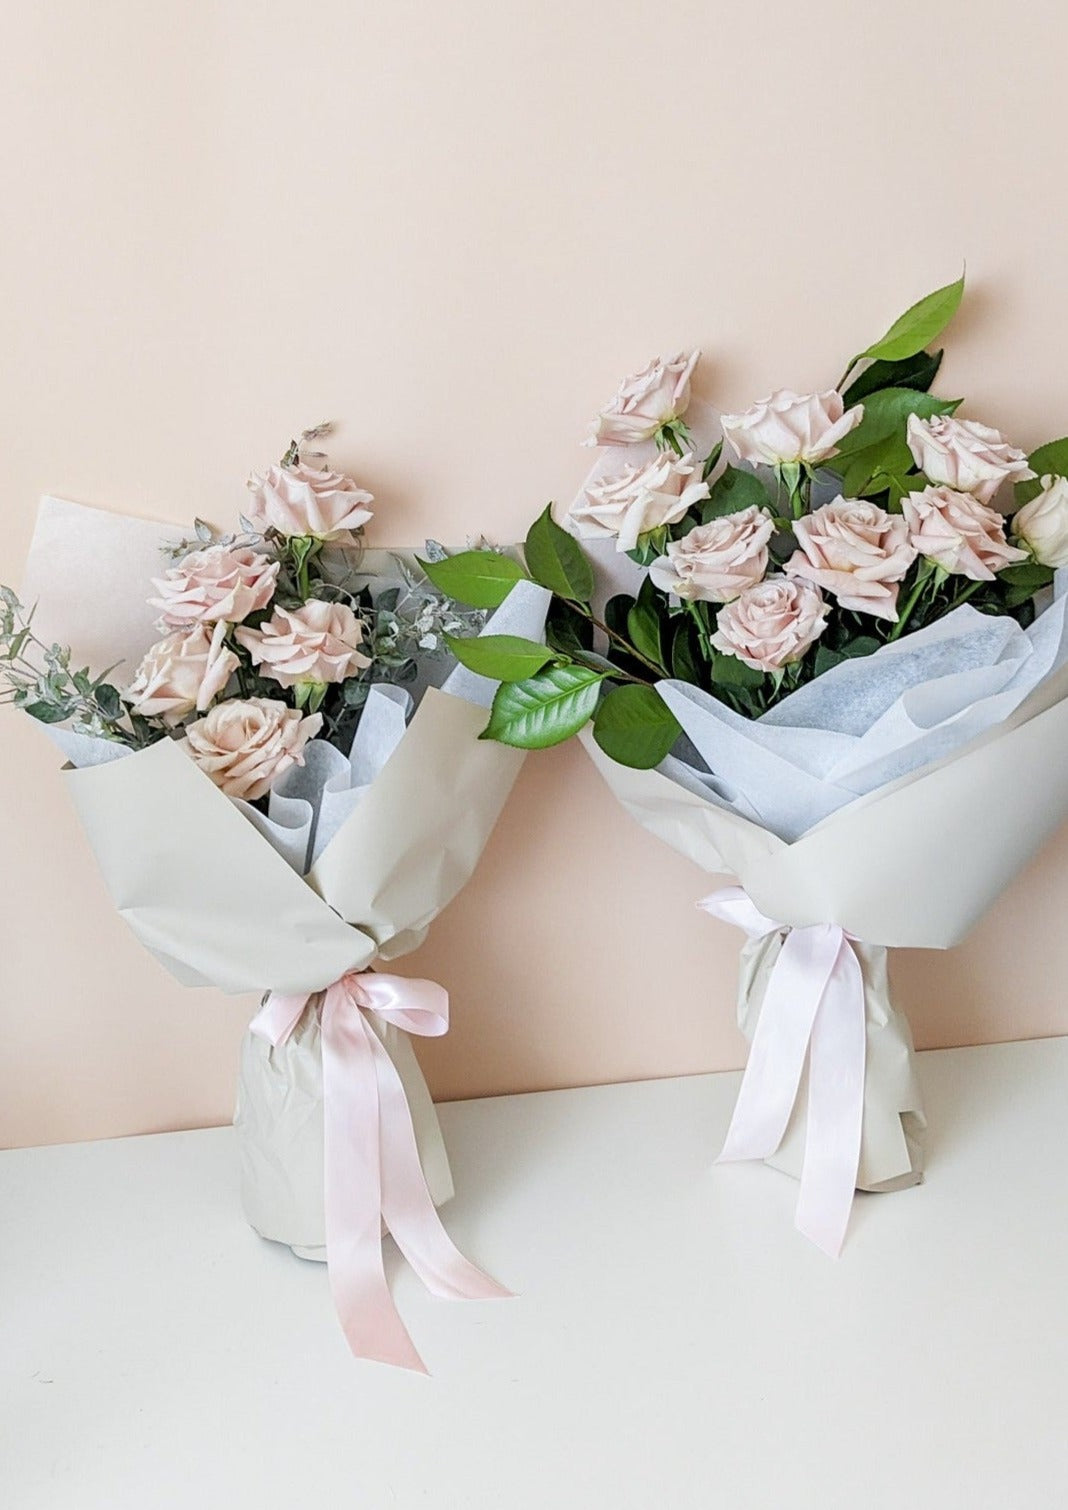 5 Blush Pink Roses Bouquet